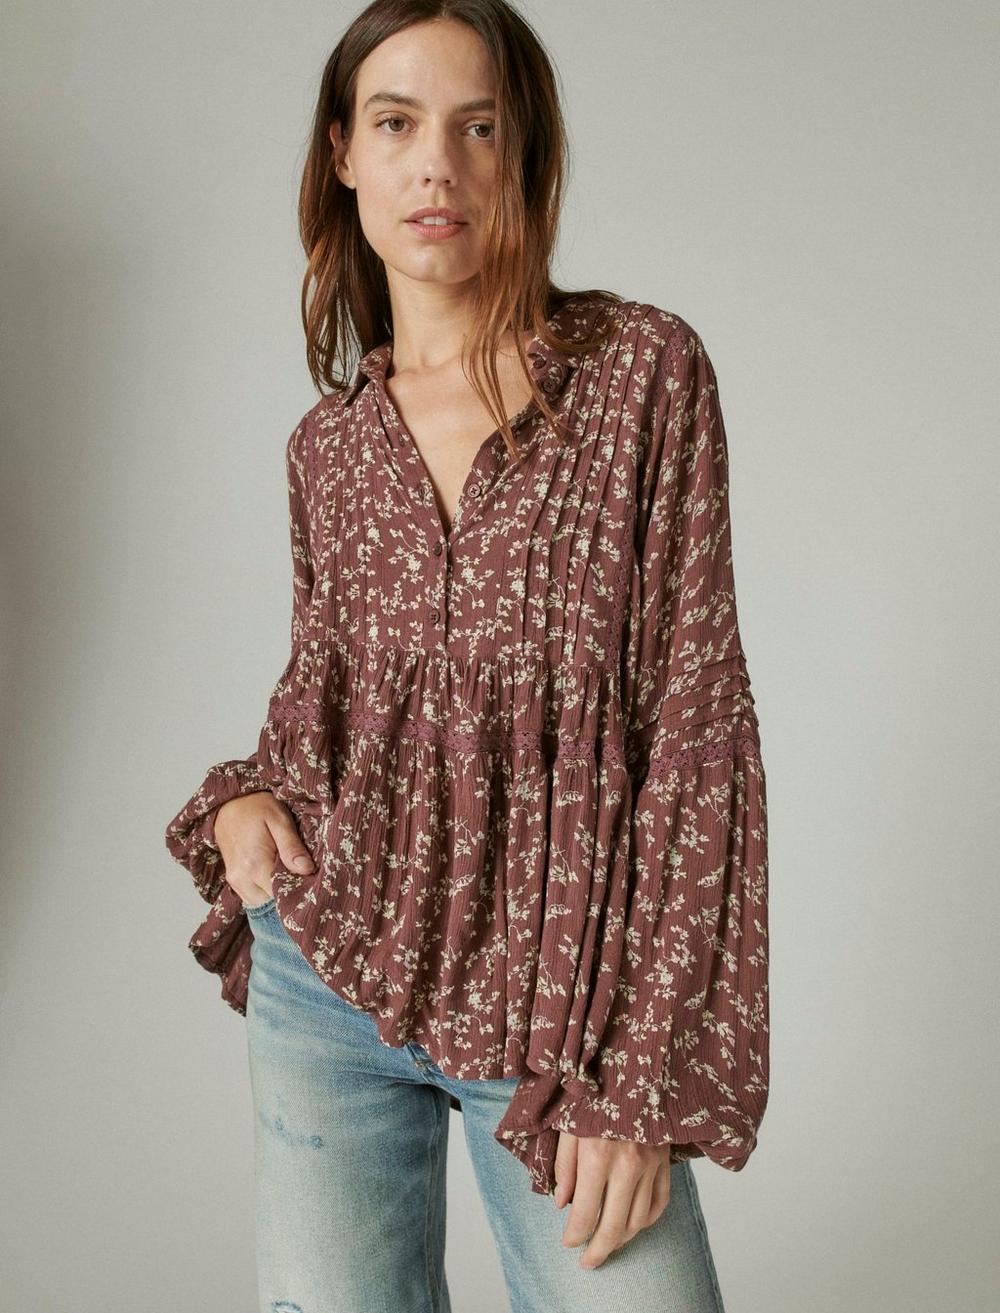 PRINTED LONG SLEEVE POPOVER TOP, image 1